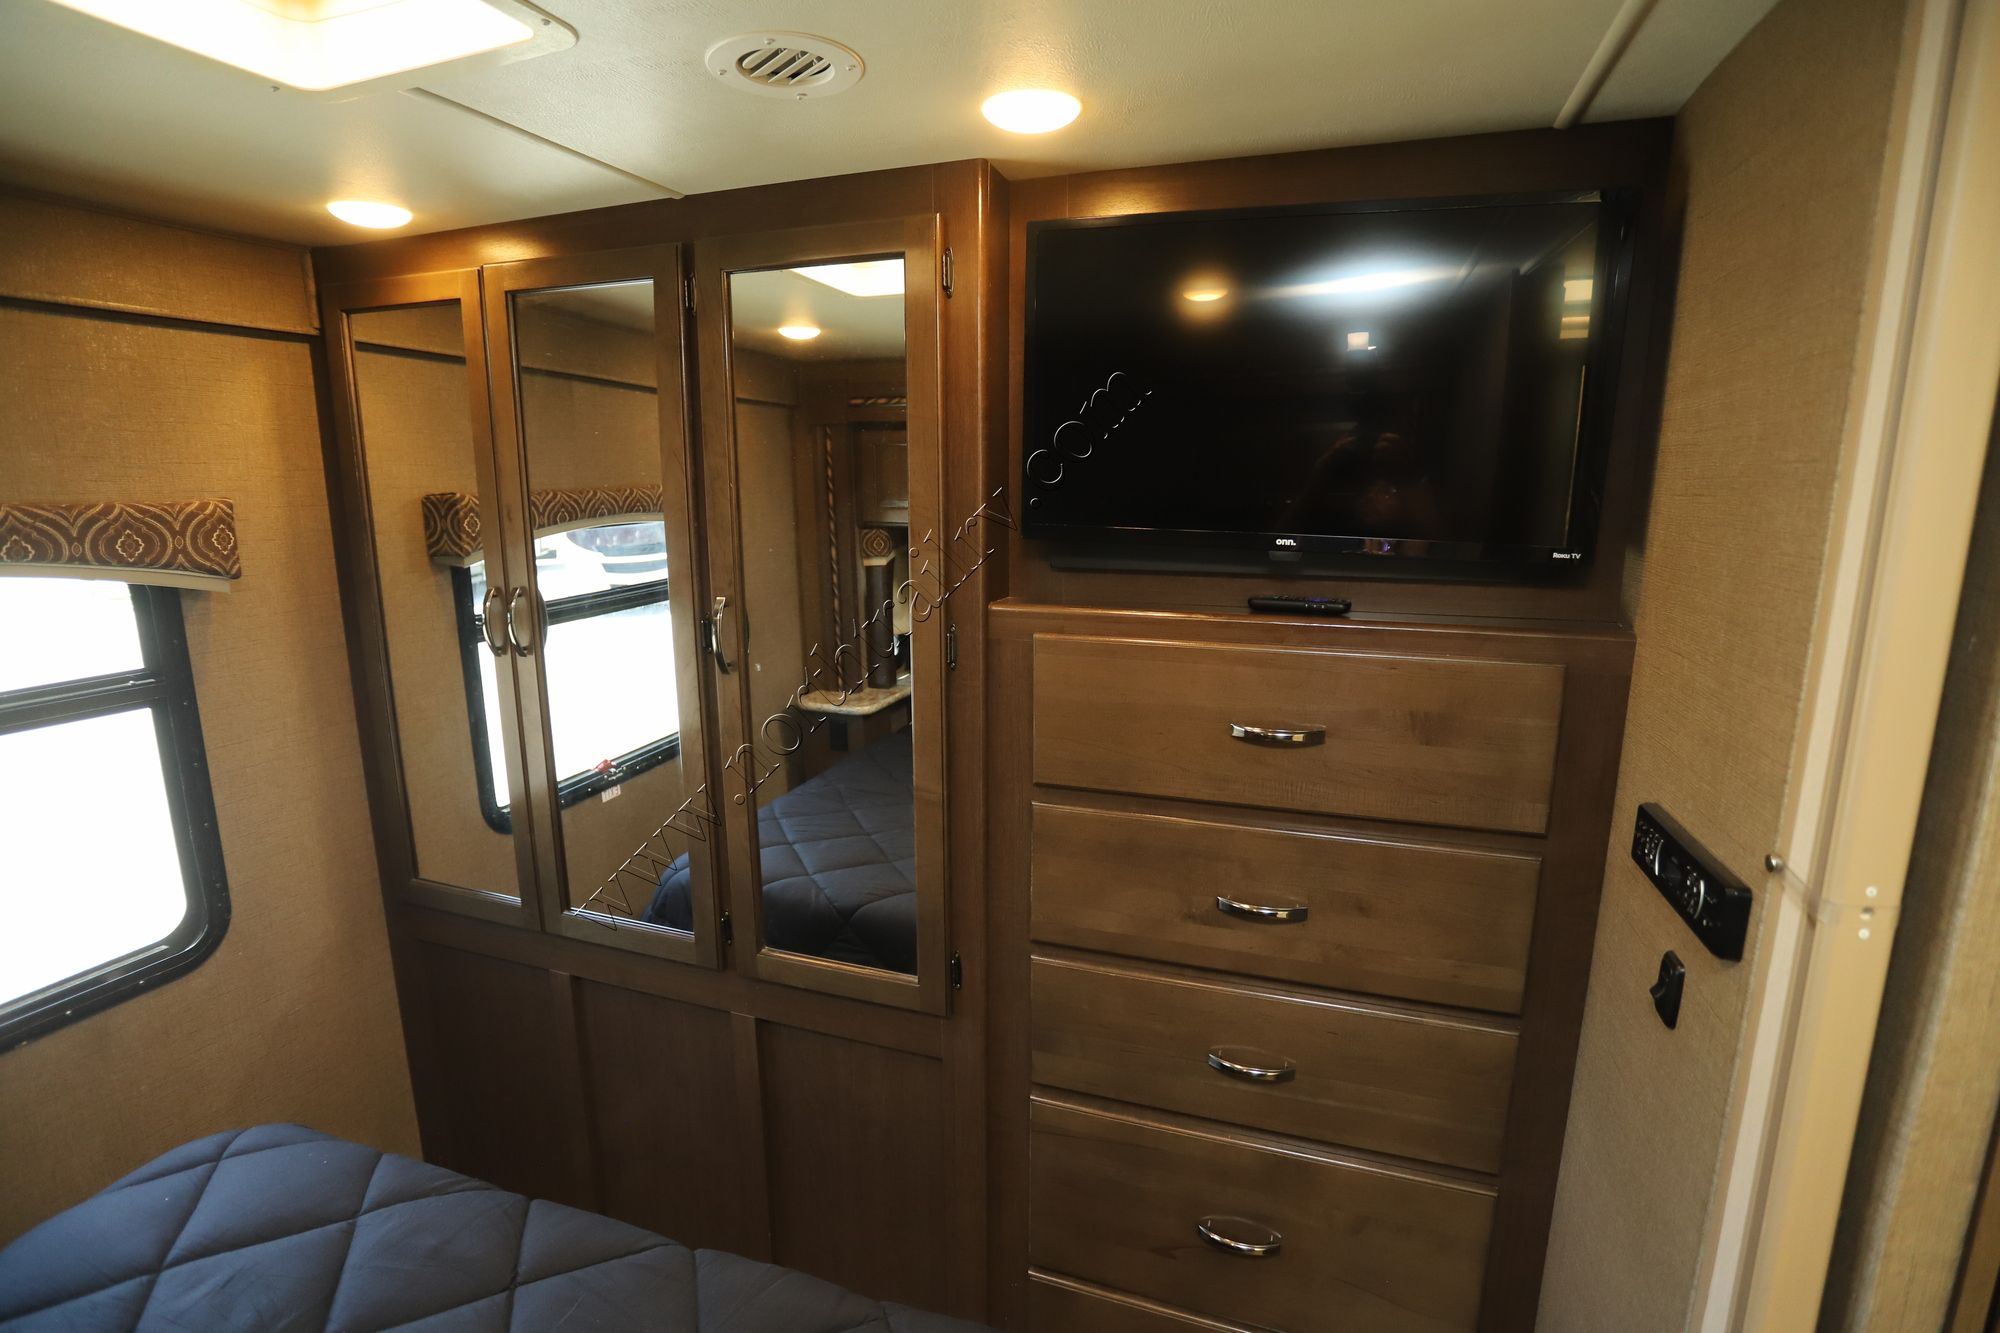 Used 2017 Thor Chateau 31L Class C  For Sale